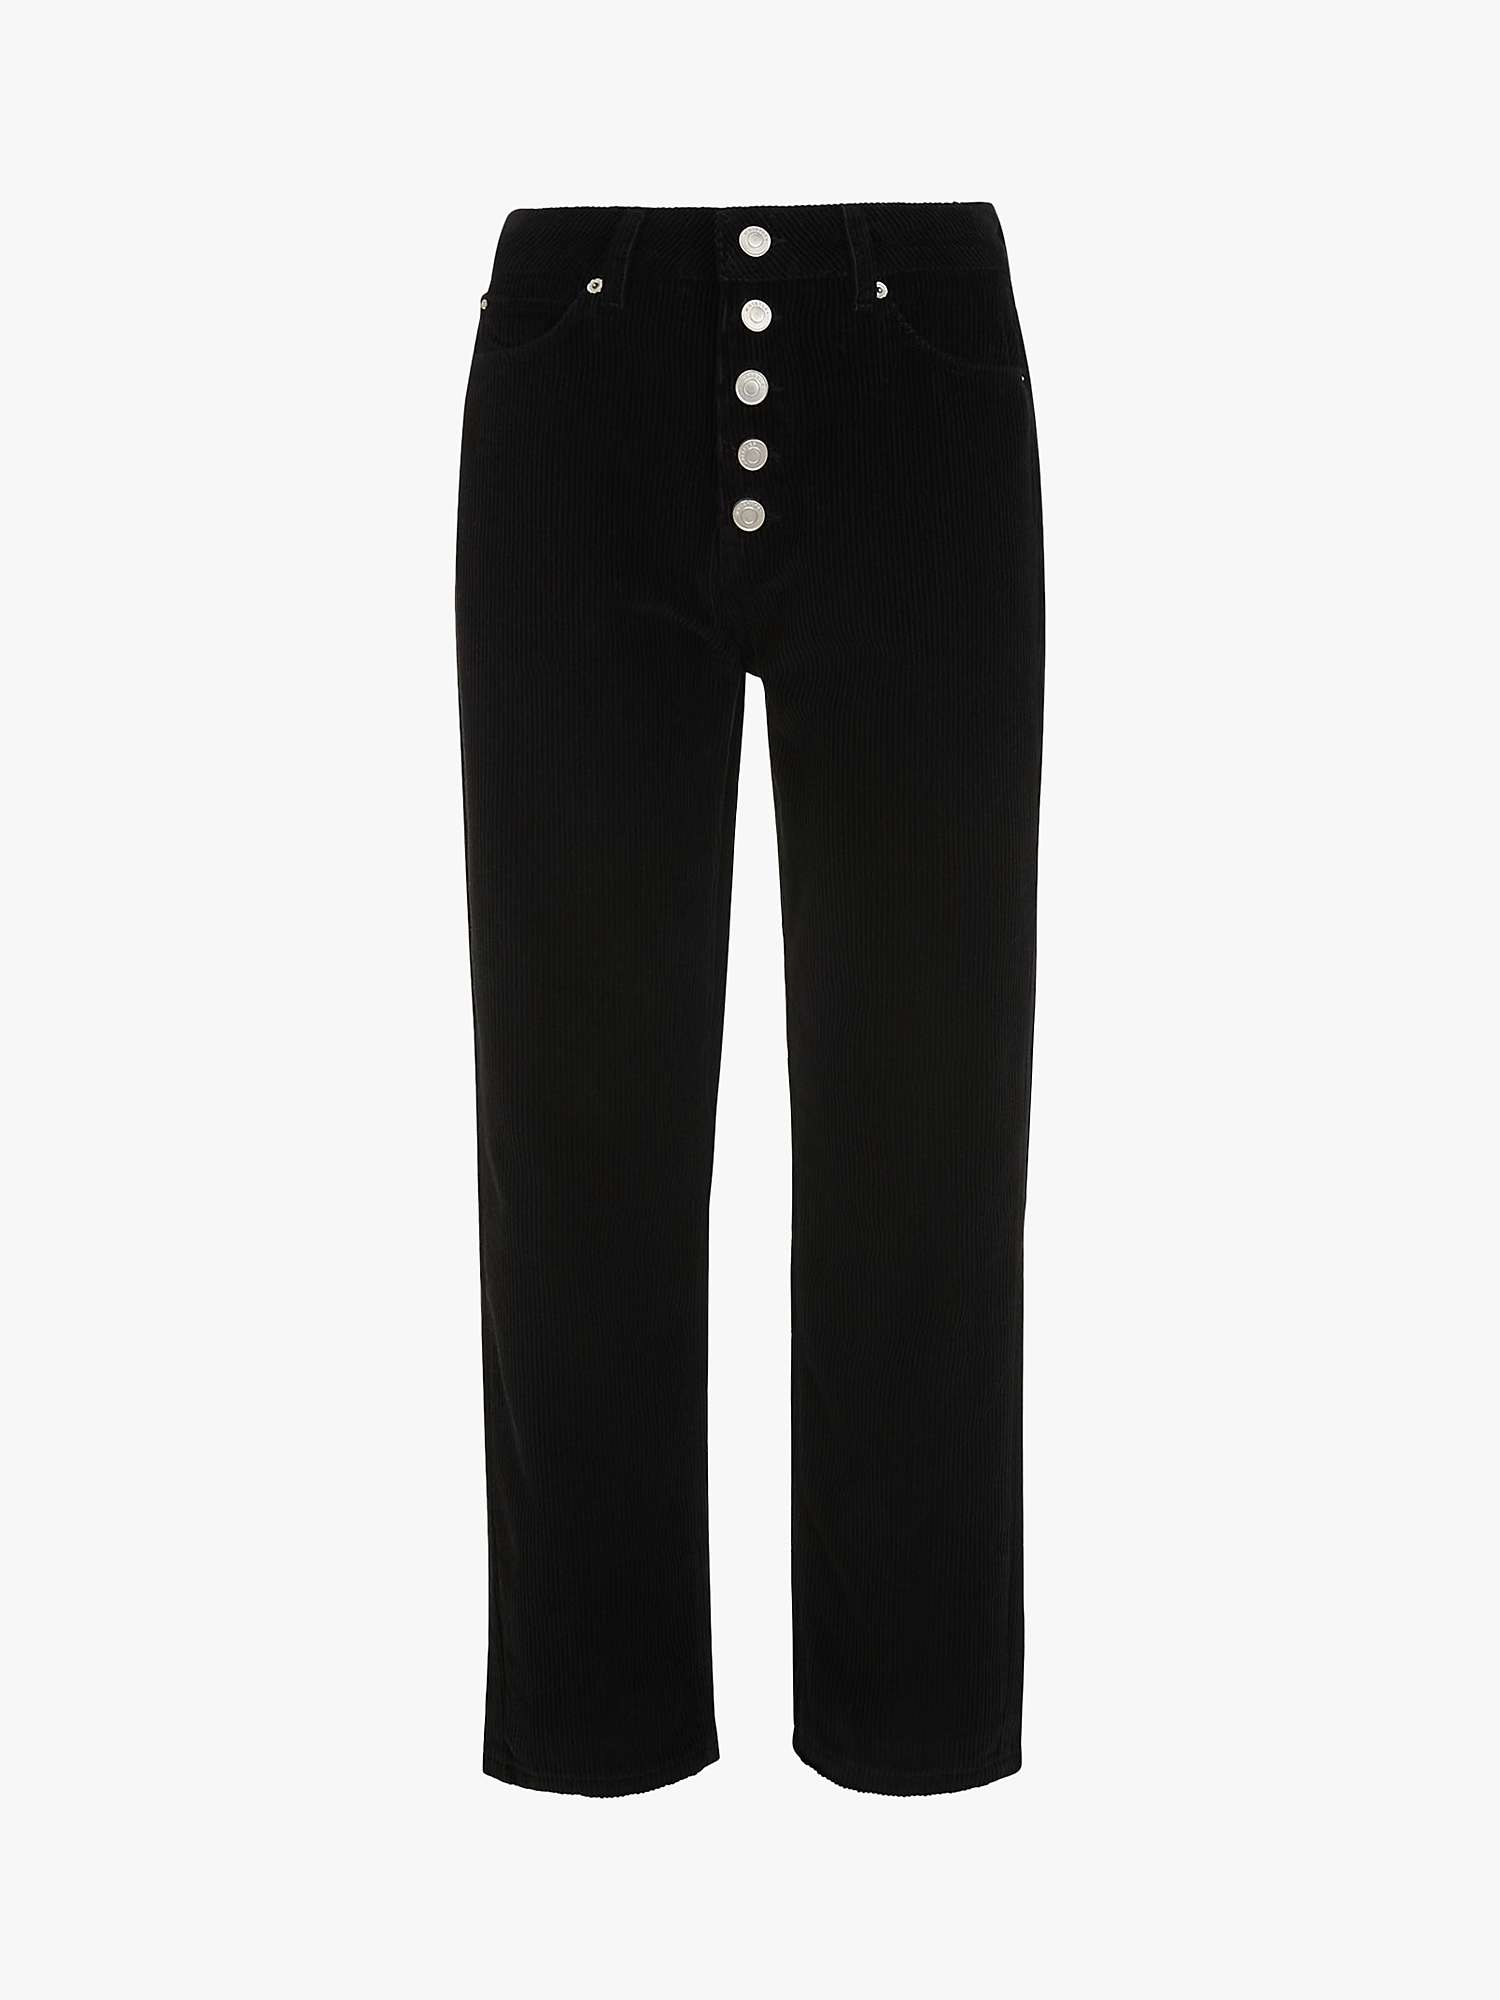 Buy Whistles Petite Authentic Hollie Button Jeans, Black Online at johnlewis.com